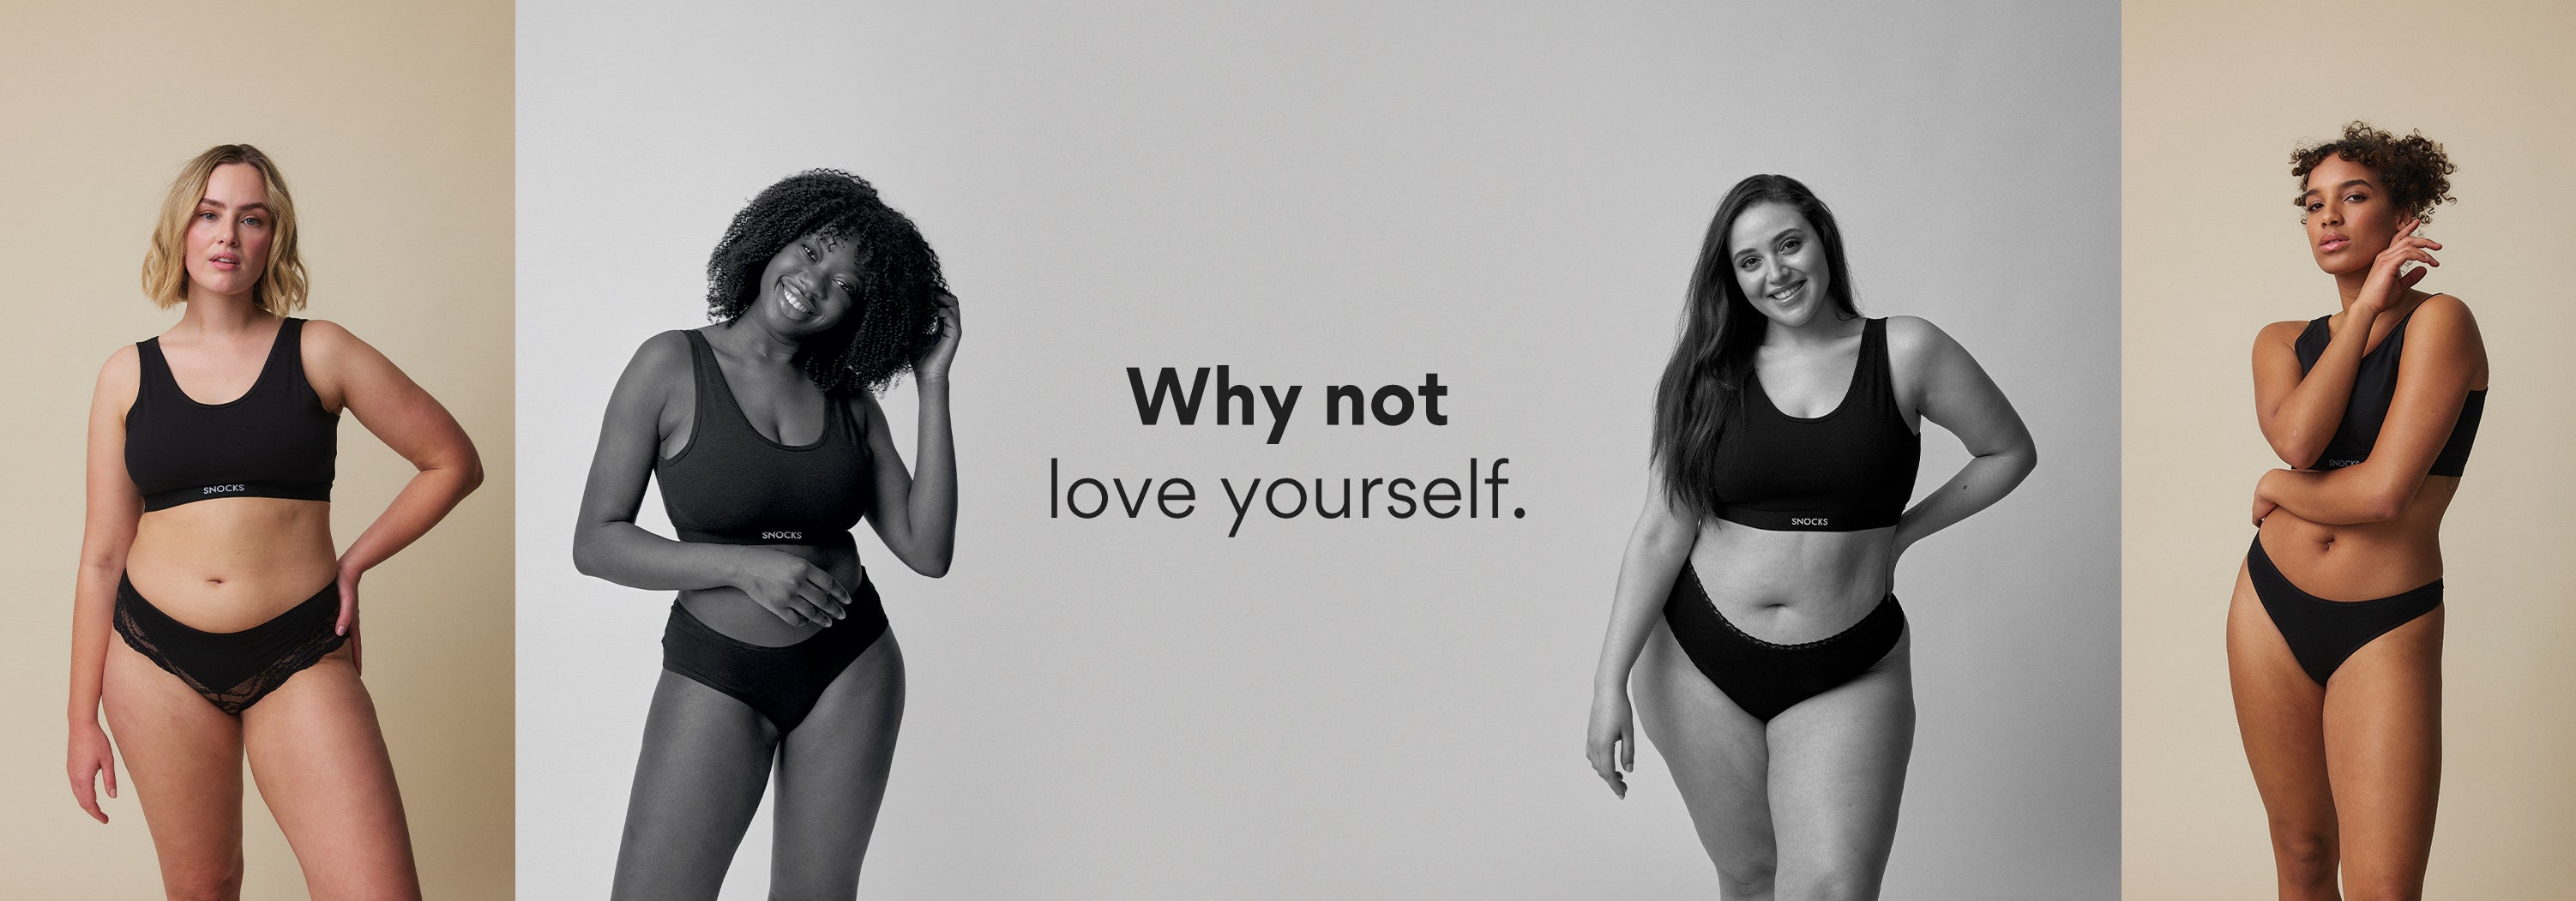 Why not love yourself.